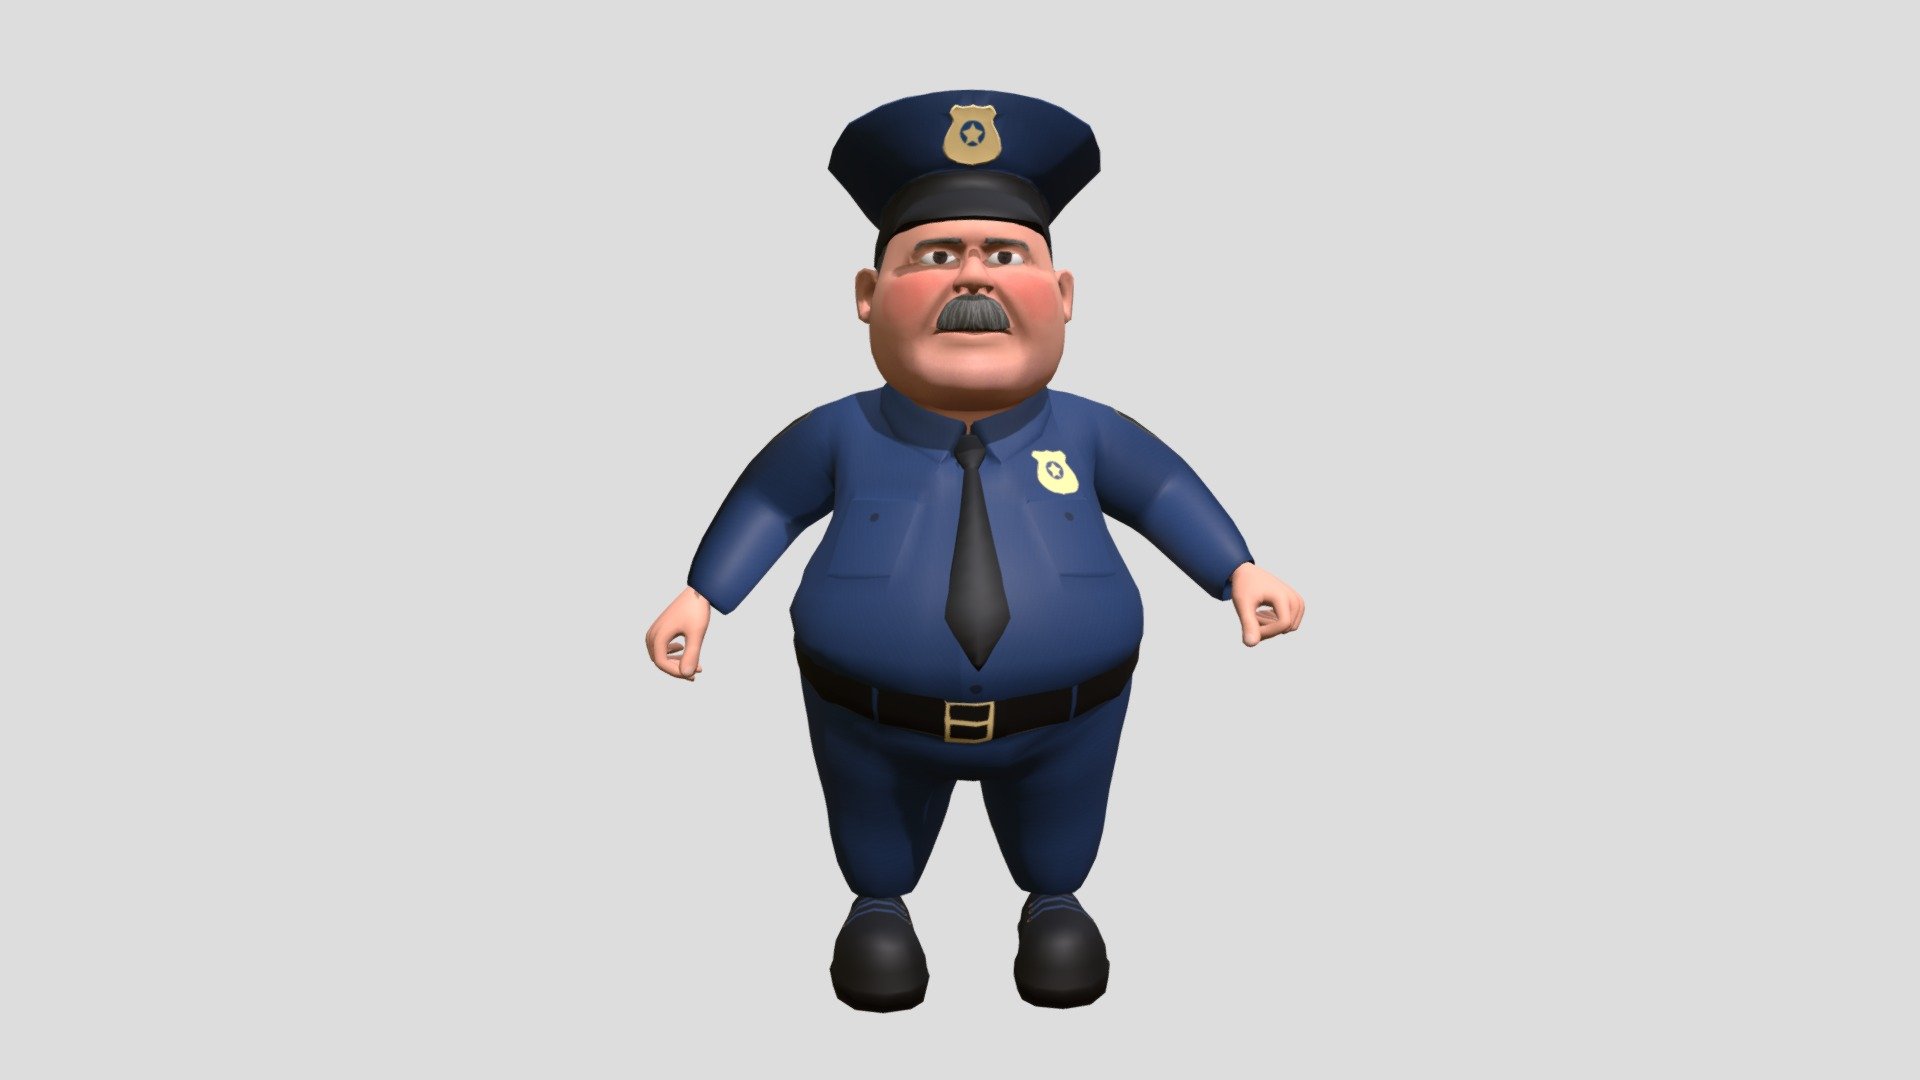 3d Game Ready Police Man Character.

High detail and lowpoly 3d model.

Rigged, with high definition textures.

Complete archive in additional file - Police Man - 3D model by artbeesstudio 3d model